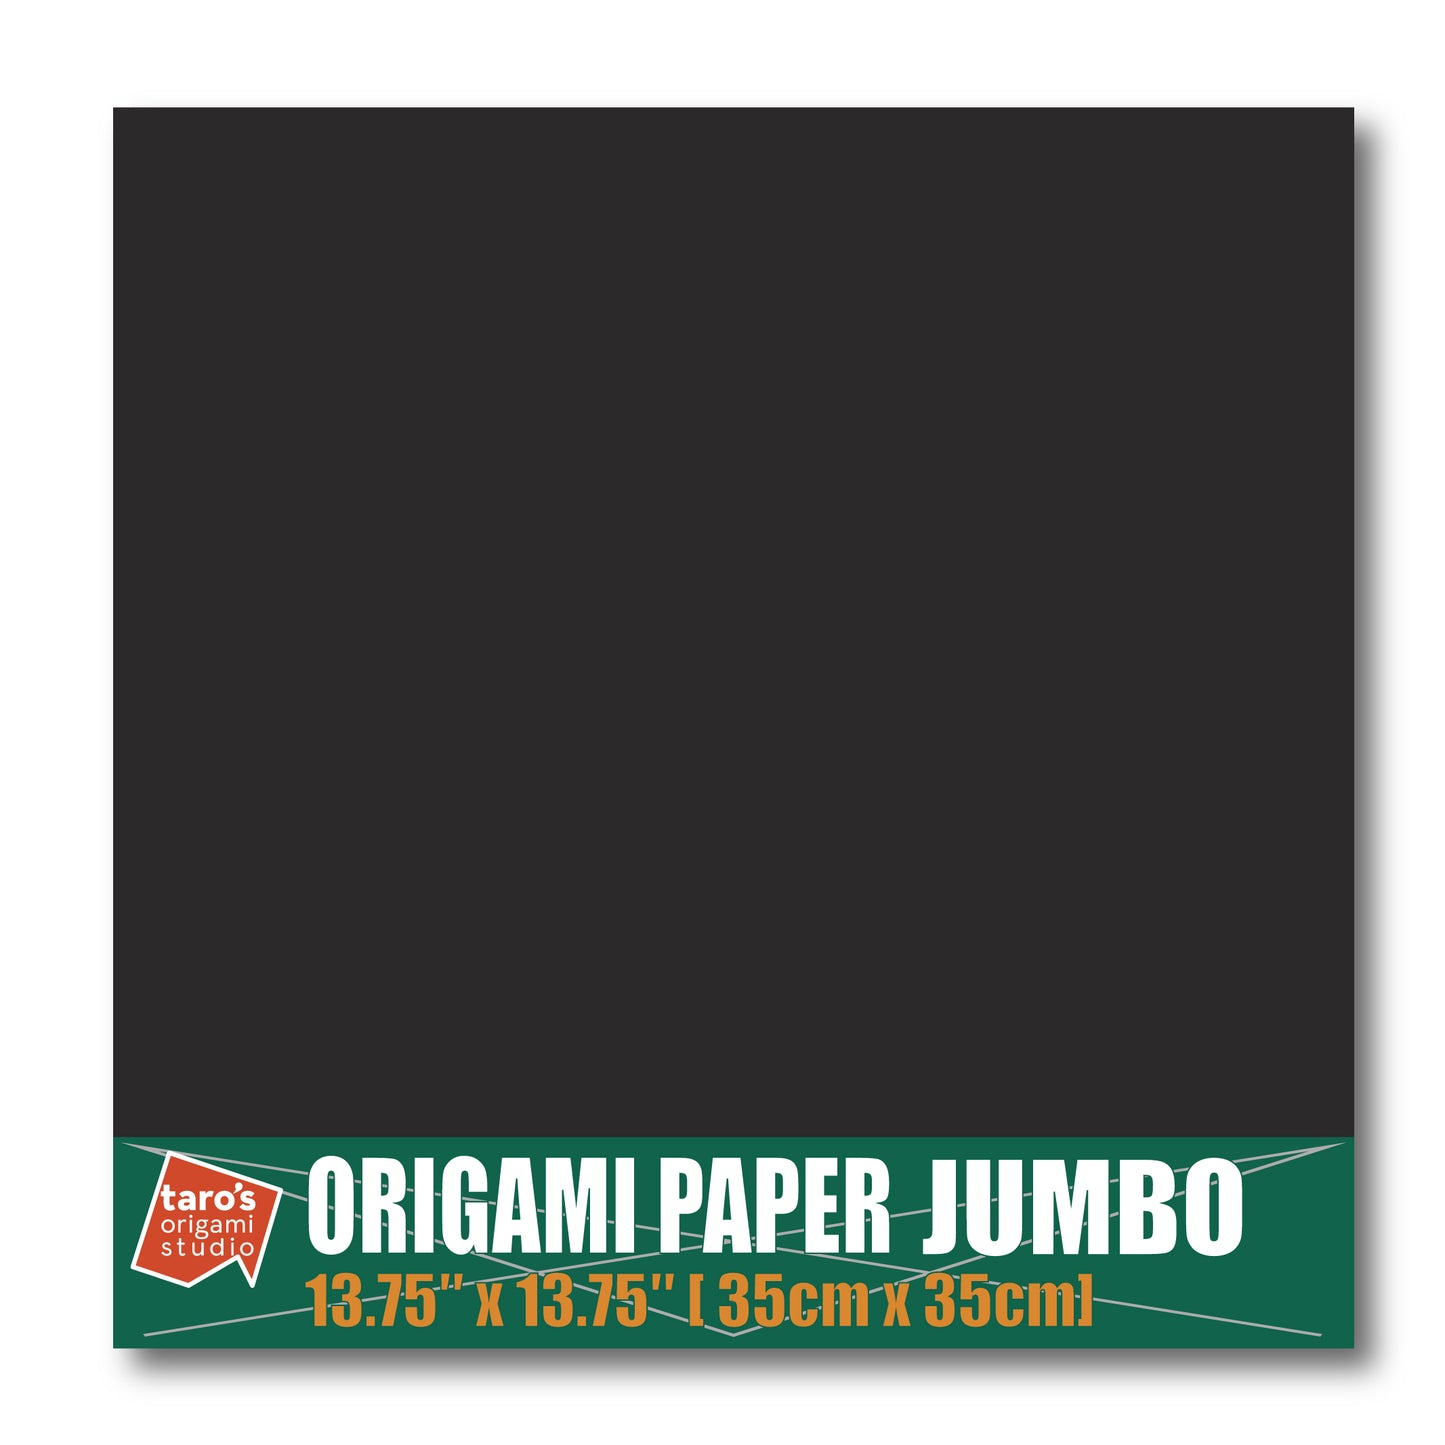 [Taro's Origami Studio] Jumbo 13.75 Inch / 35cm One Sided Single Color (Black) 25 Sheets (All Same Color) Square Easy Fold Premium Japanese Paper (Made in Japan)